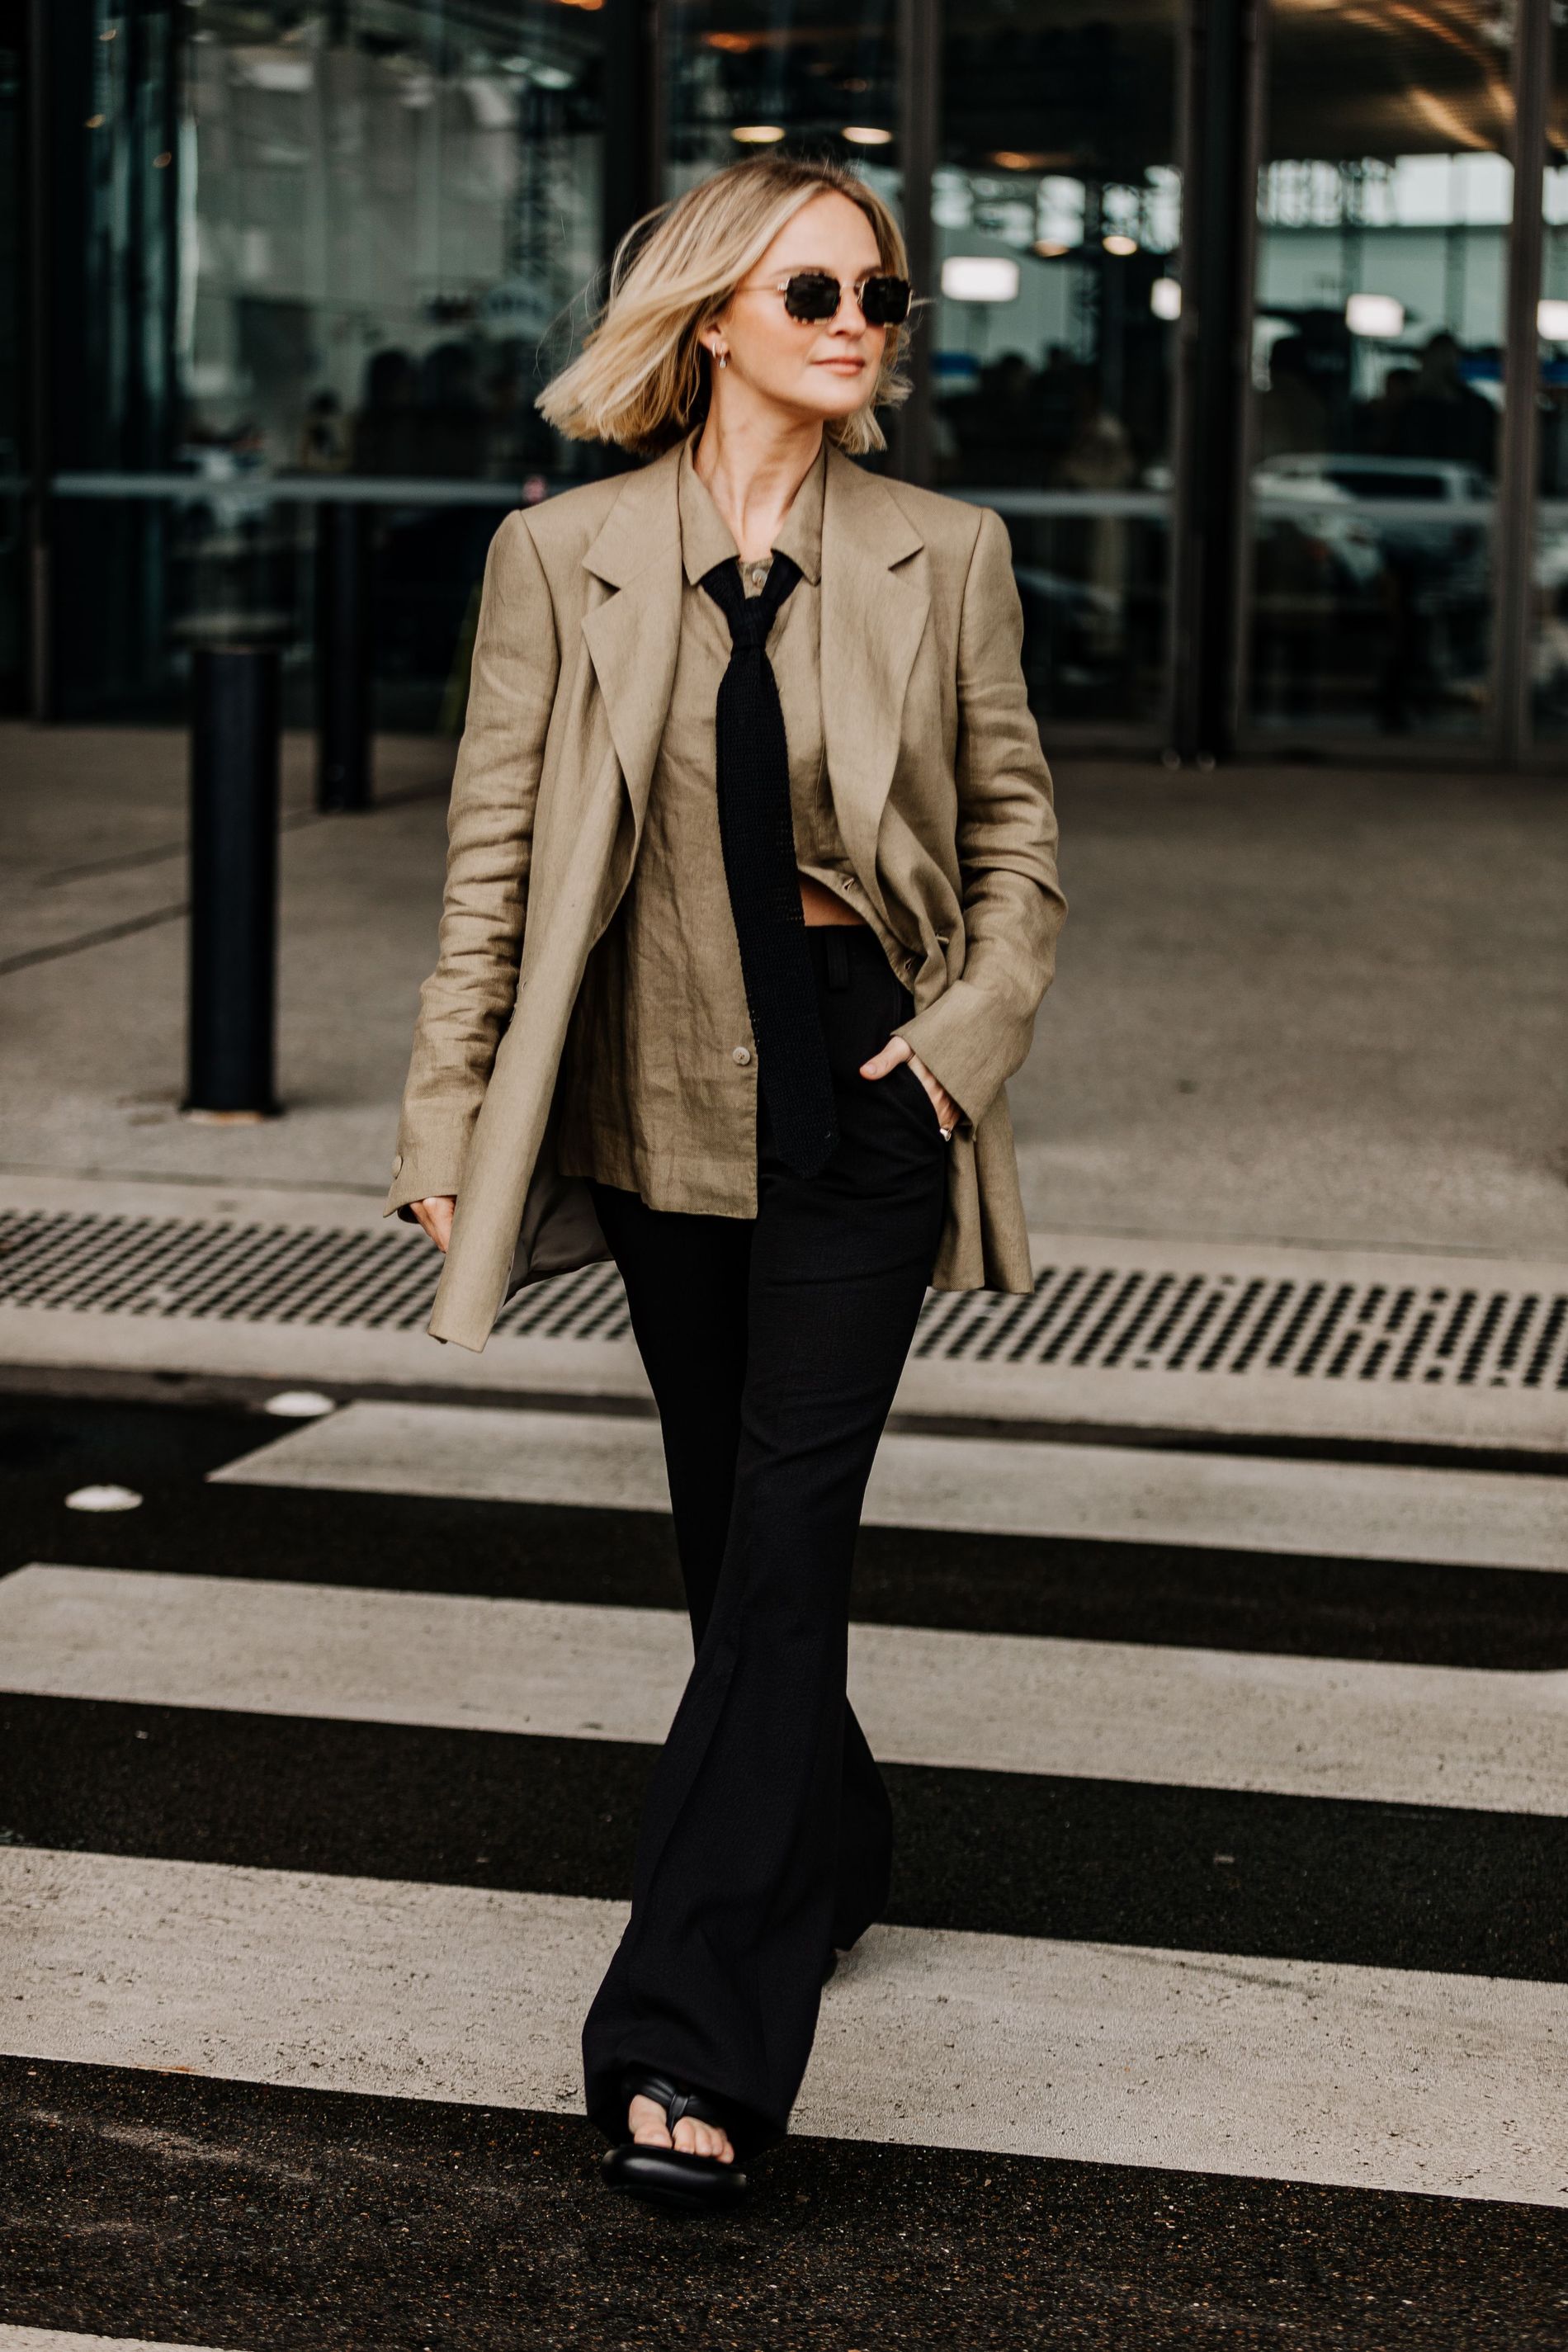 Woman wearing beige blazer and shirt with black necktie and trousers